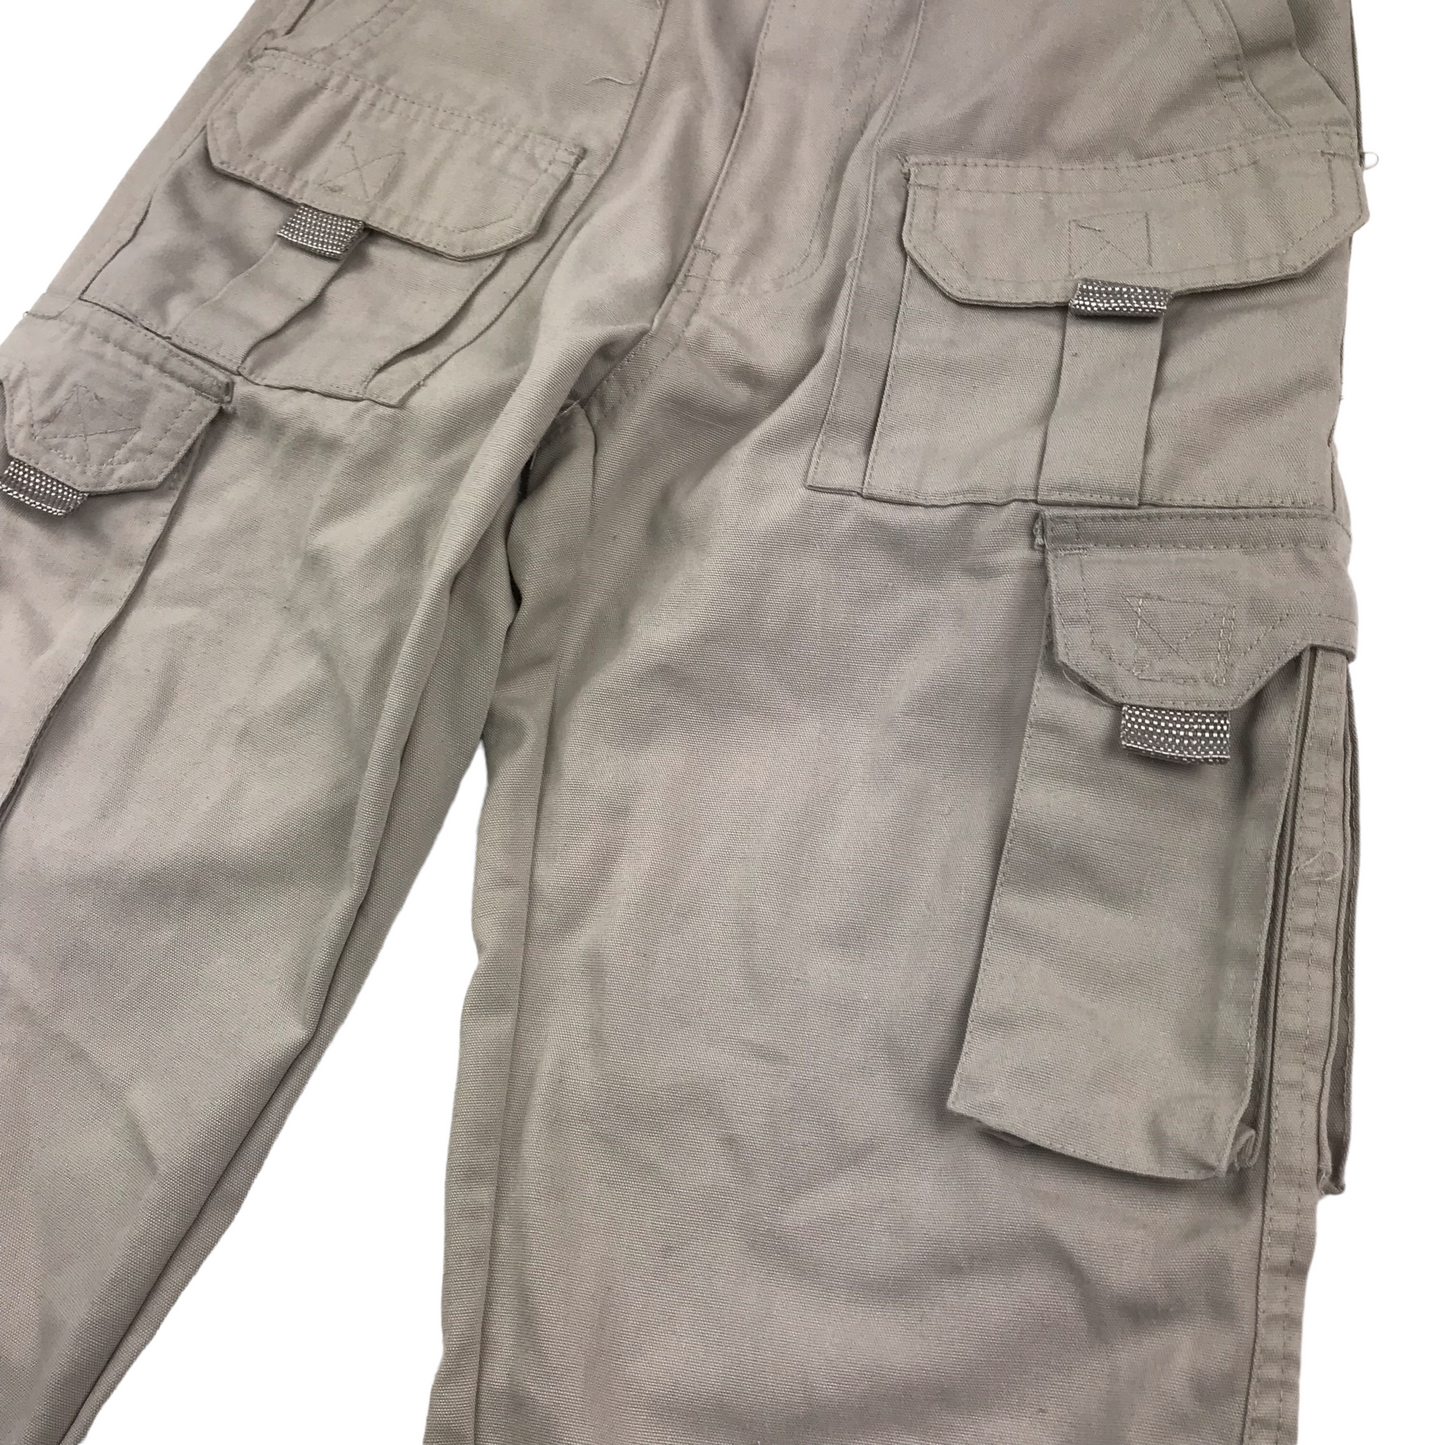 Grey Combat Trousers Age 8-9